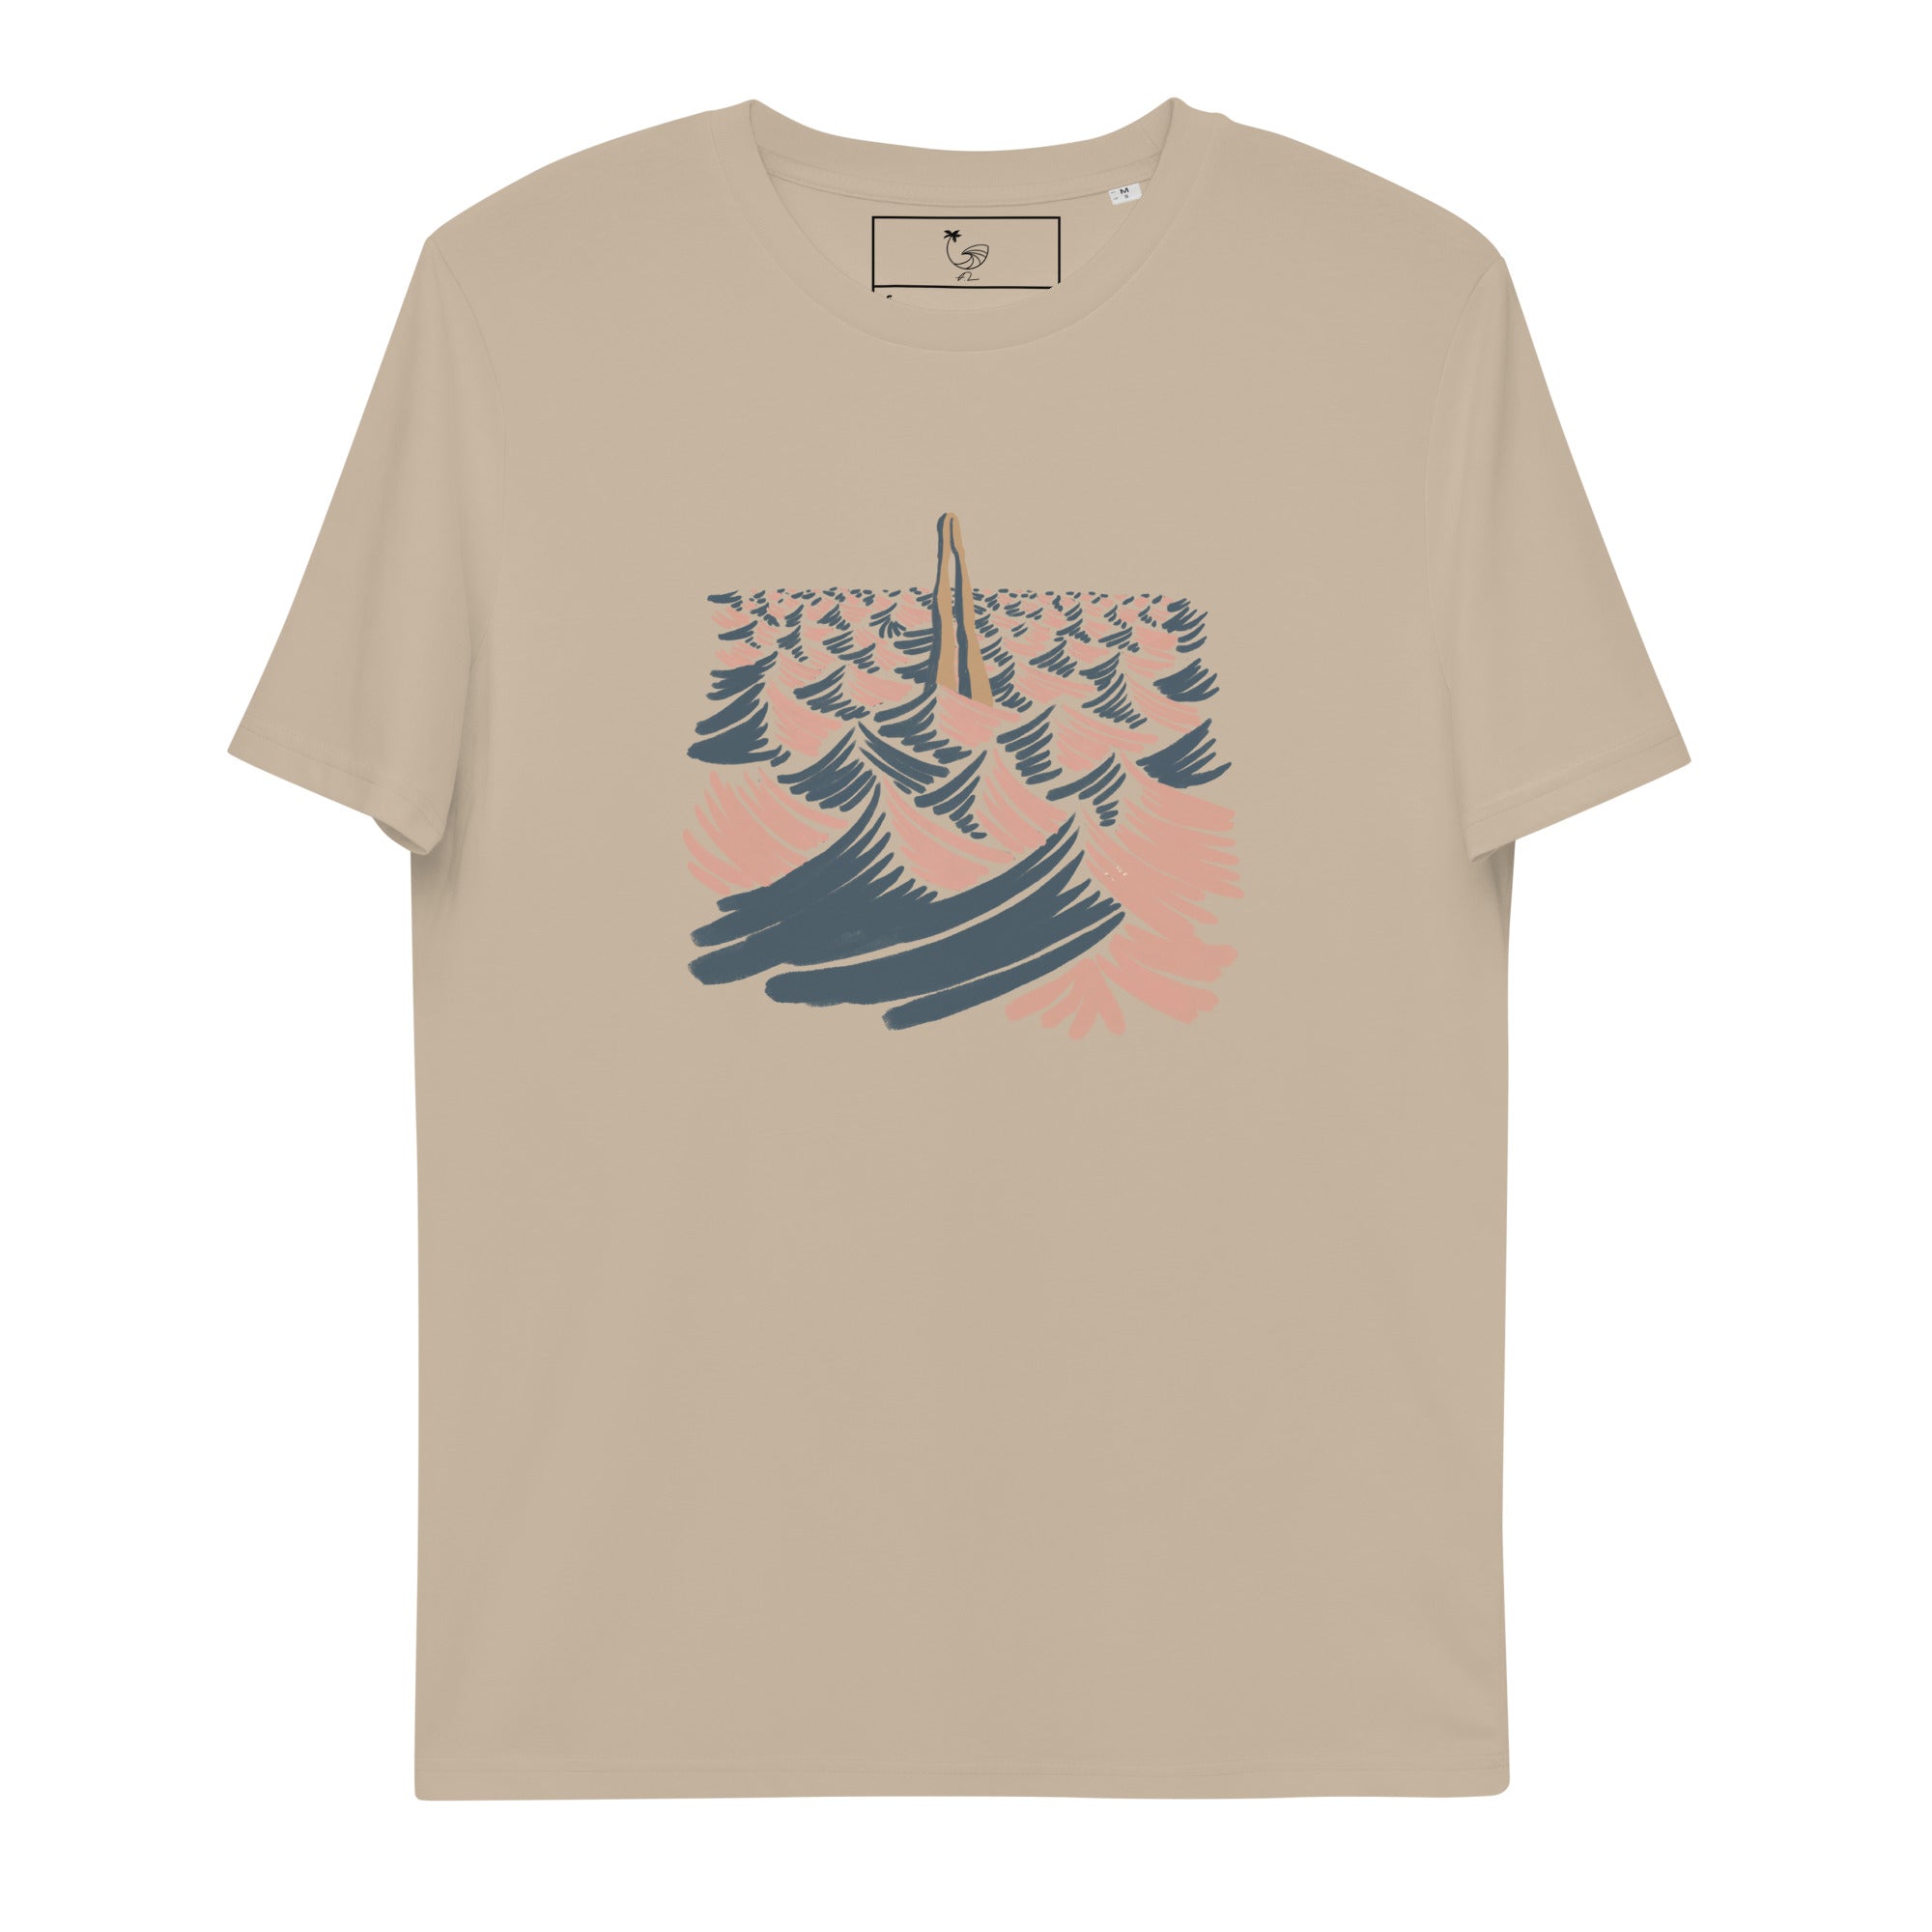 Dive into the weekend Organic Tee